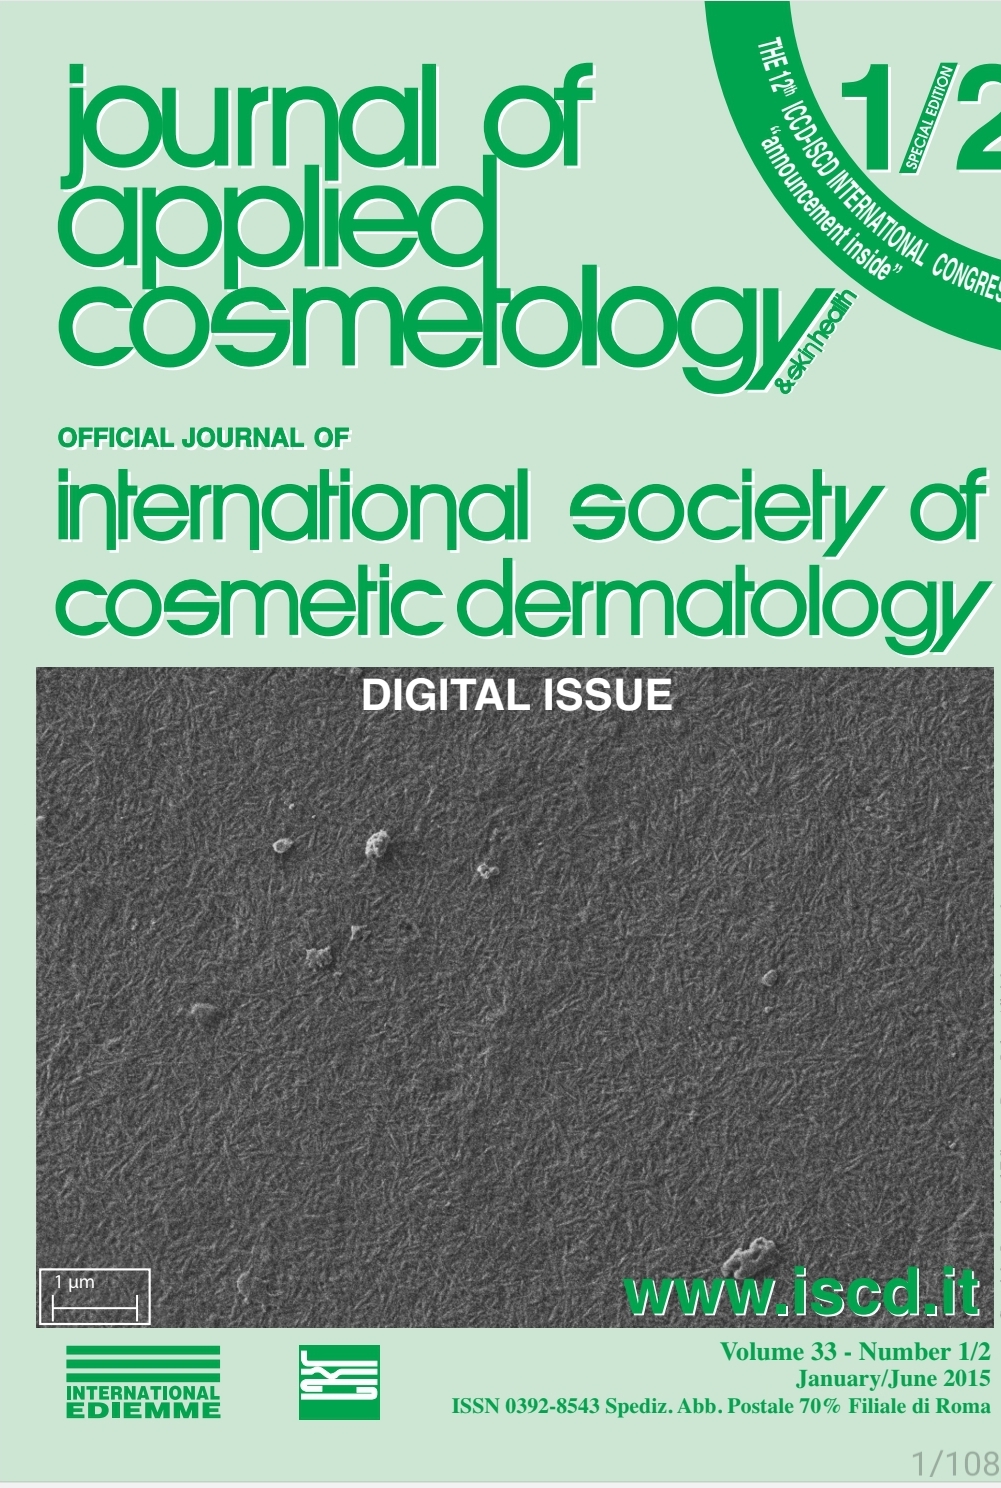 					View Vol. 33 No. 1/2 (2015): Journal of Applied Cosmetology
				